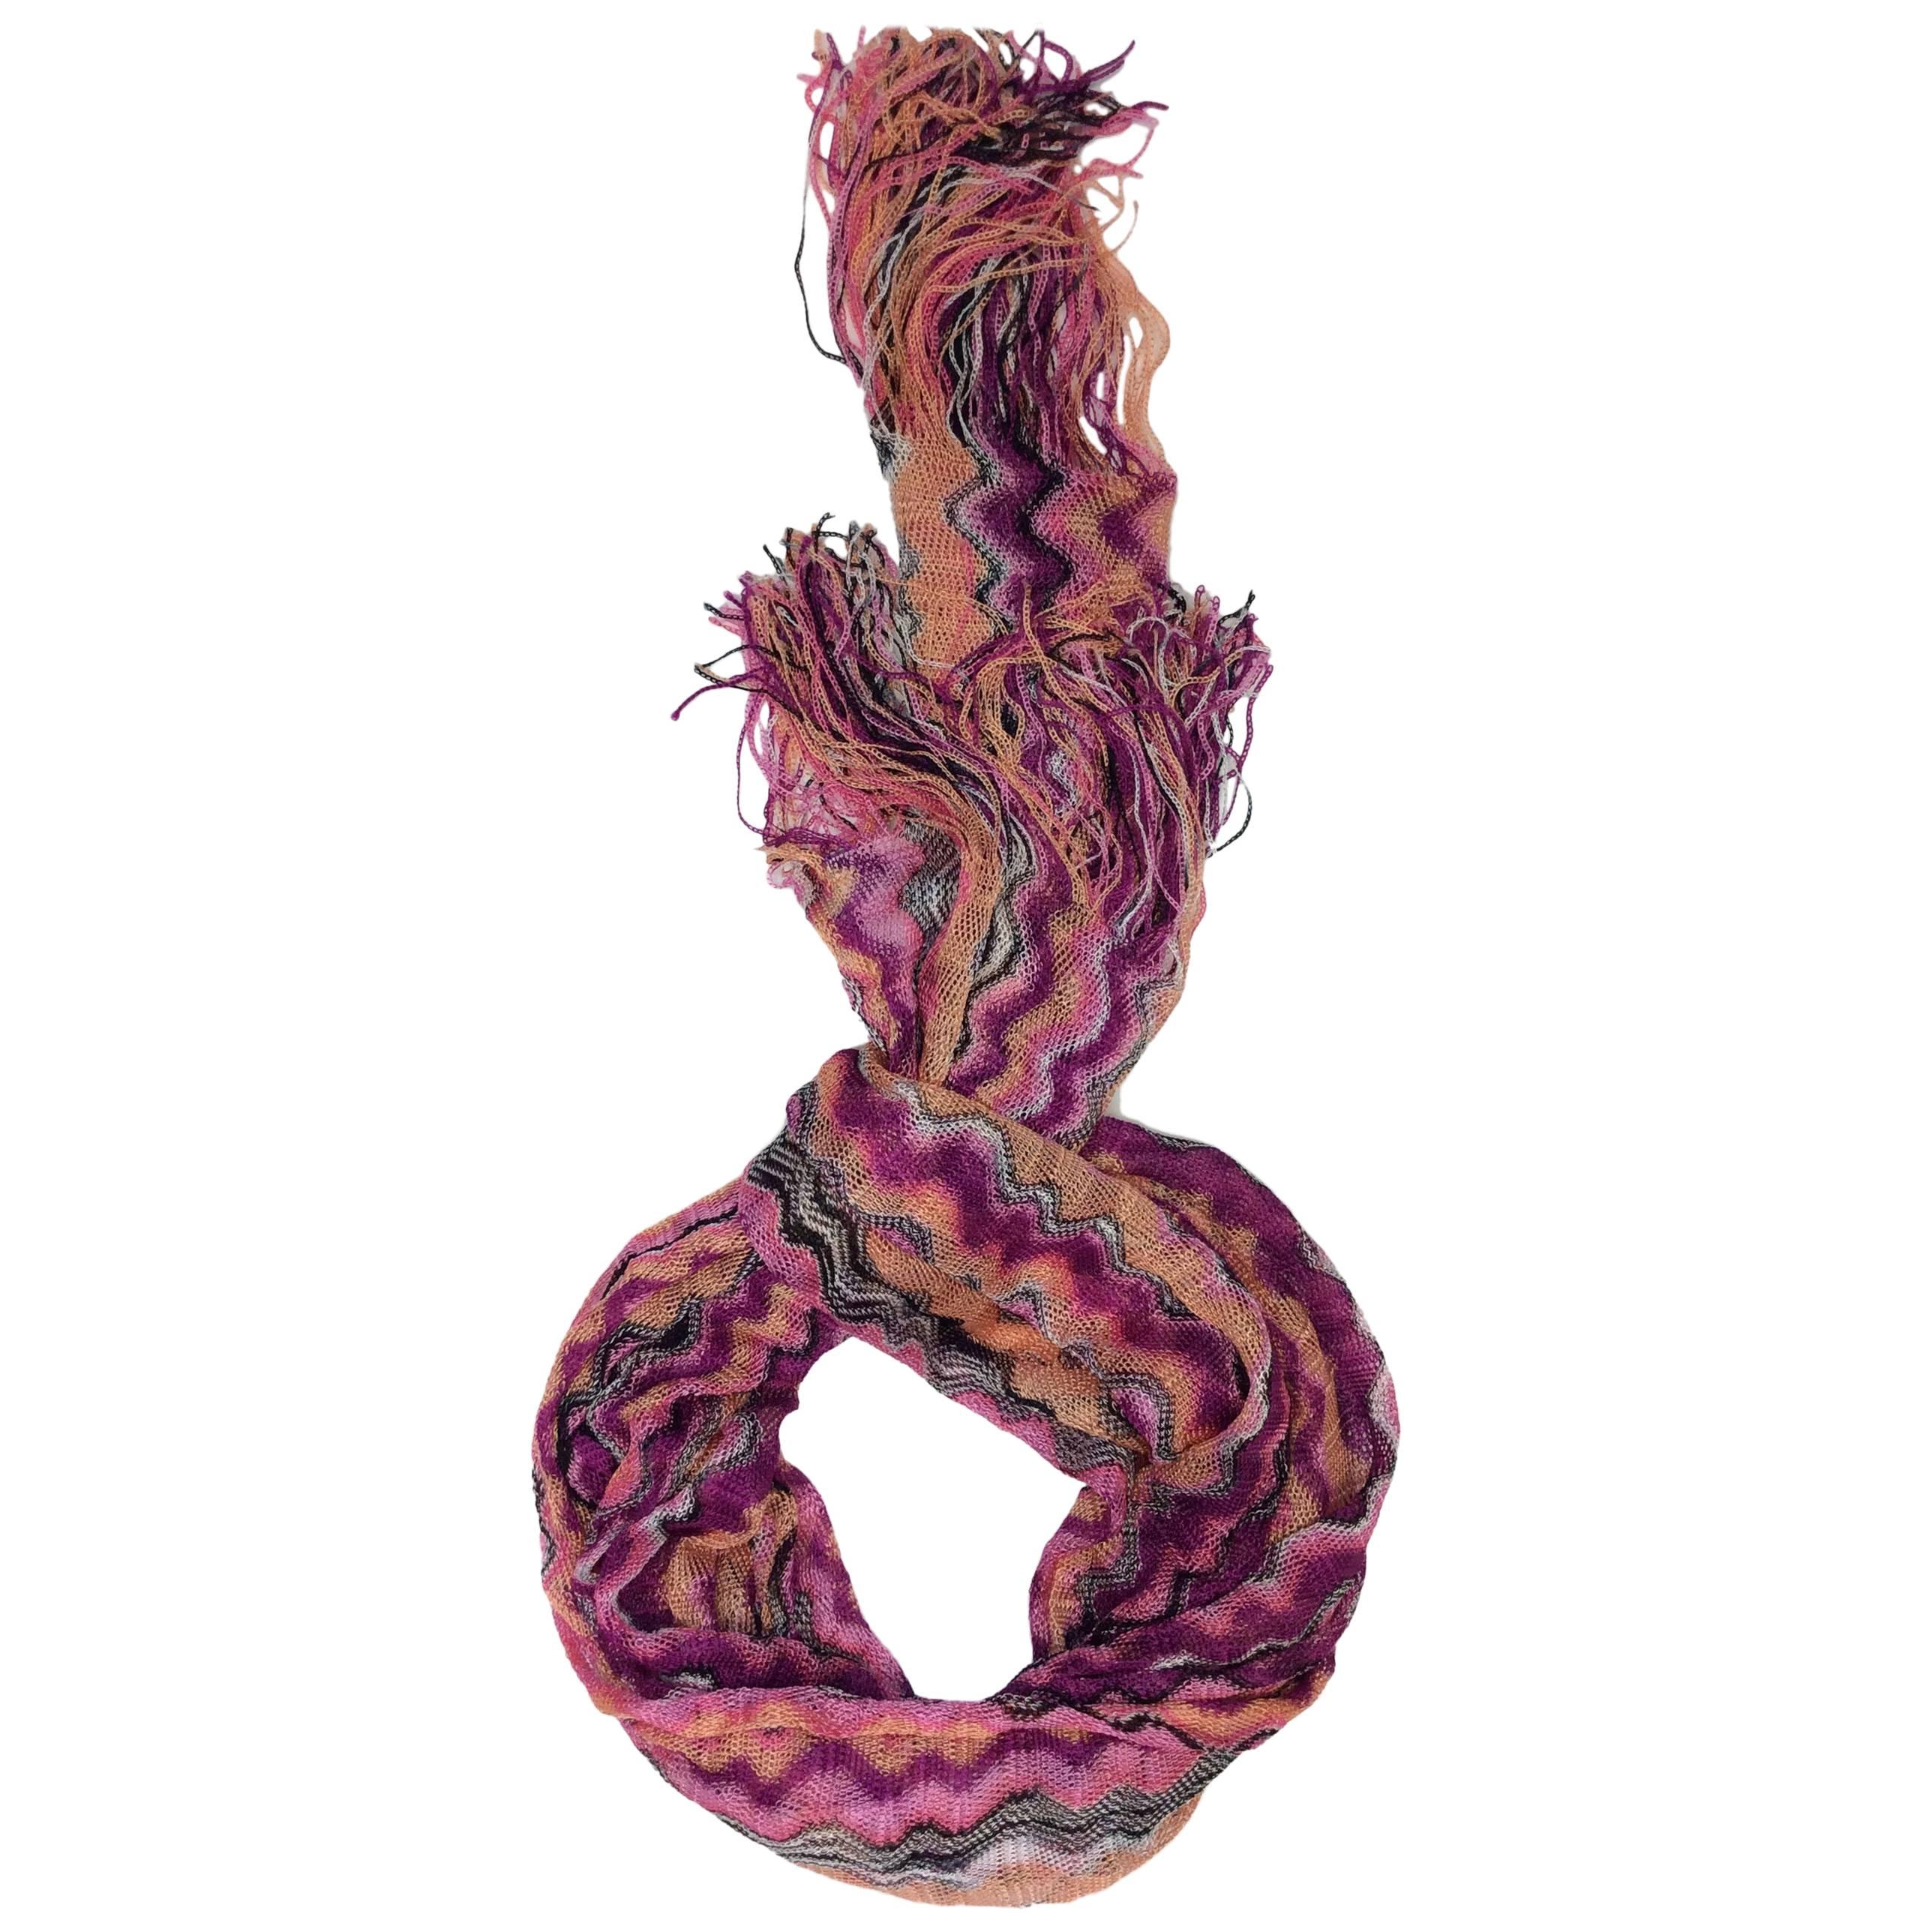 Pink Chevron Knitted Scarf with Fringe
78 inches long
15 inches wide
100% Viscose